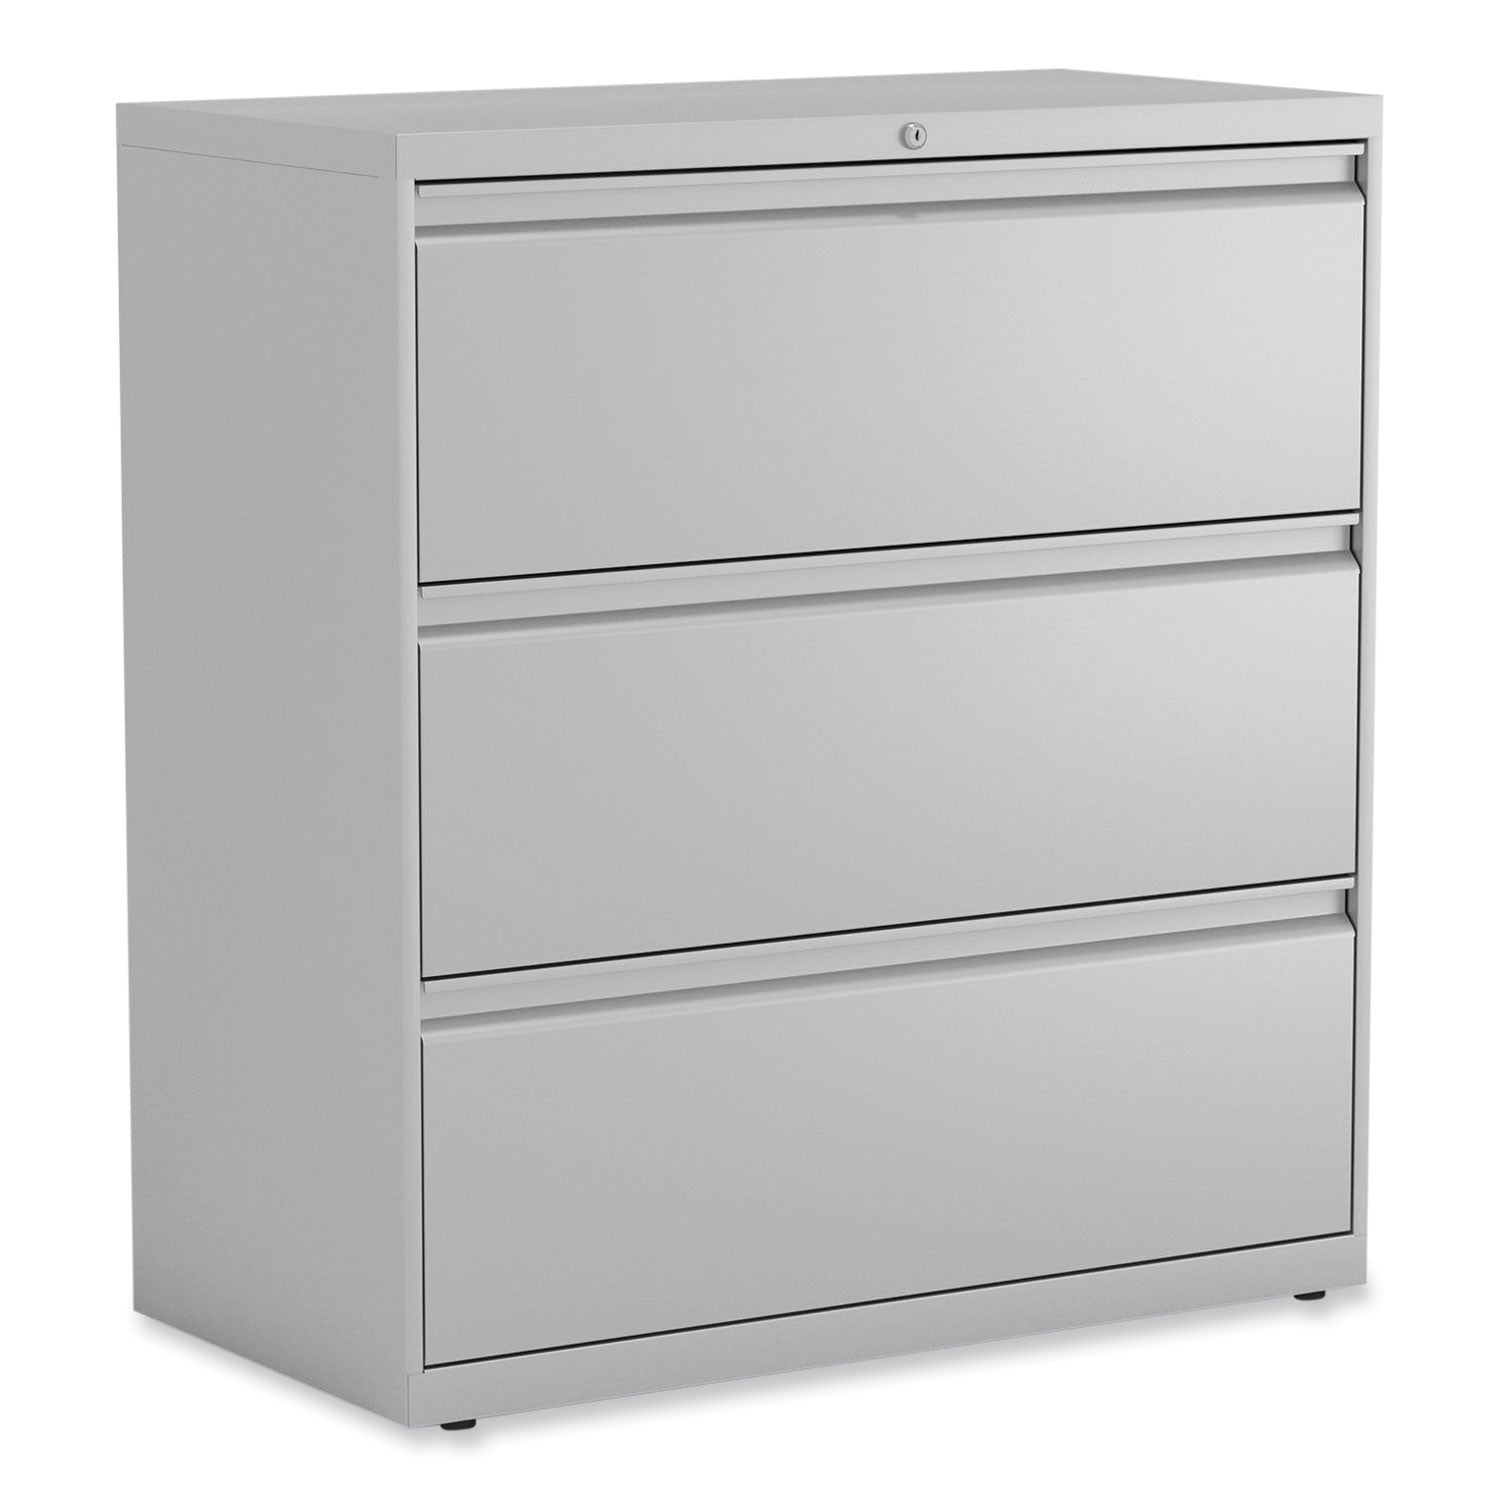 lateral-file-3-legal-letter-a4-a5-size-file-drawers-light-gray-36-x-1863-x-4025_alehlf3641lg - 1